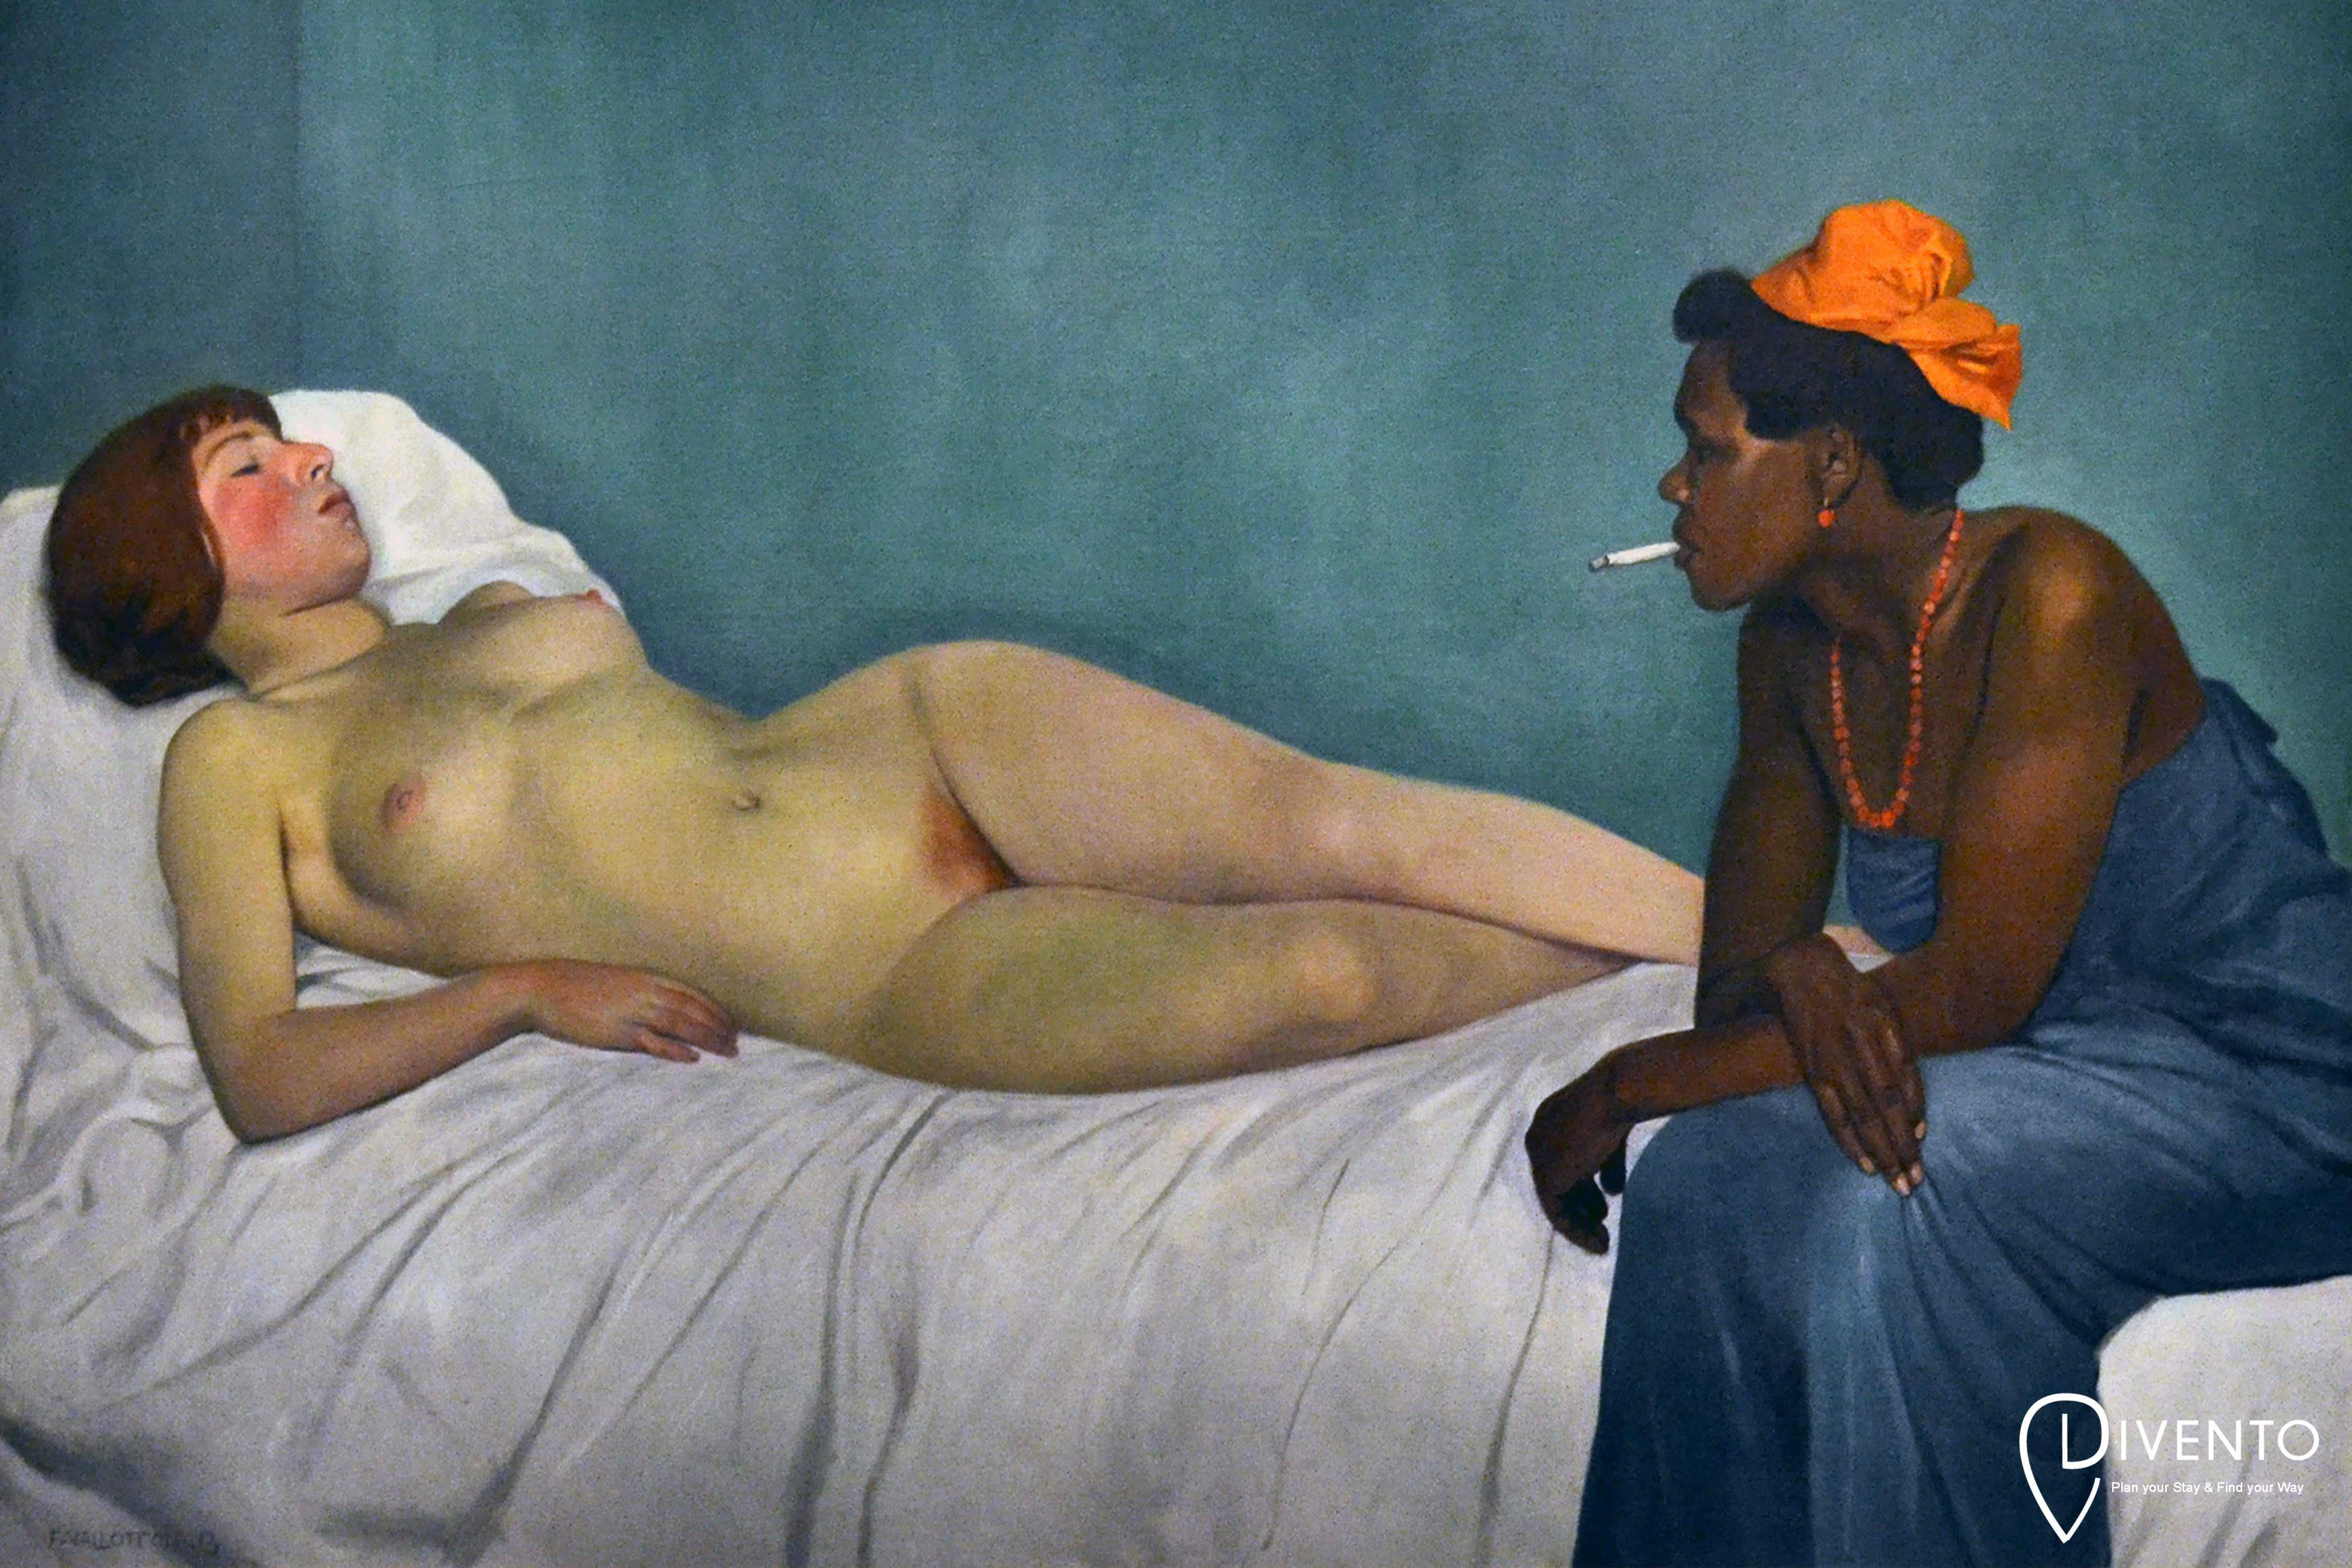 Félix Vallotton, in an exhibition at the Royal Academy in London 30 June - 29 September